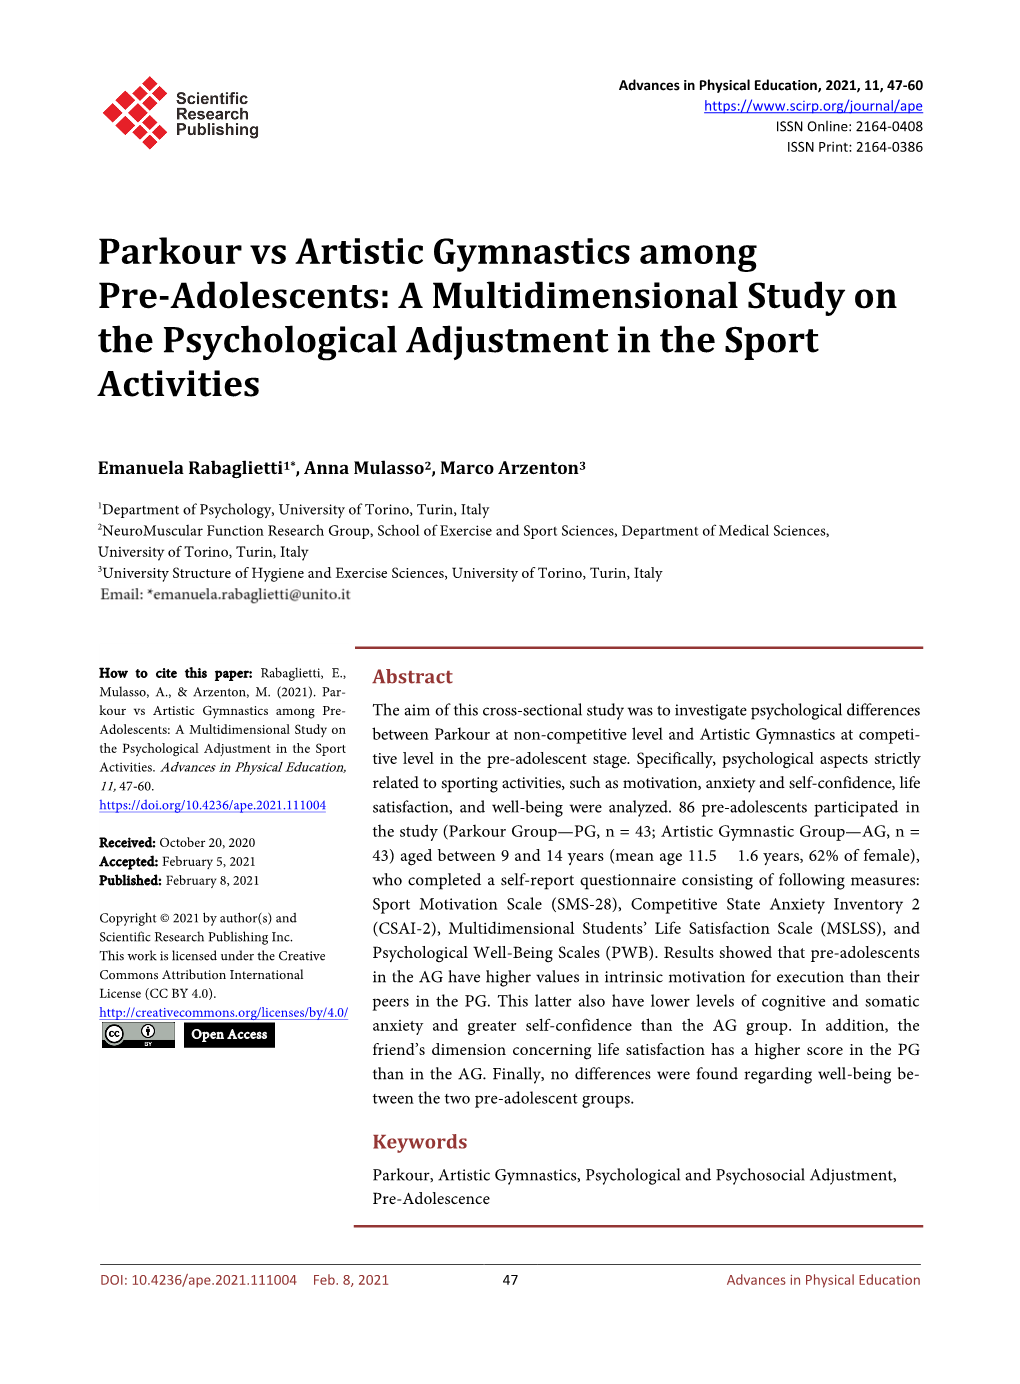 Parkour Vs Artistic Gymnastics Among Pre-Adolescents: a Multidimensional Study on the Psychological Adjustment in the Sport Activities